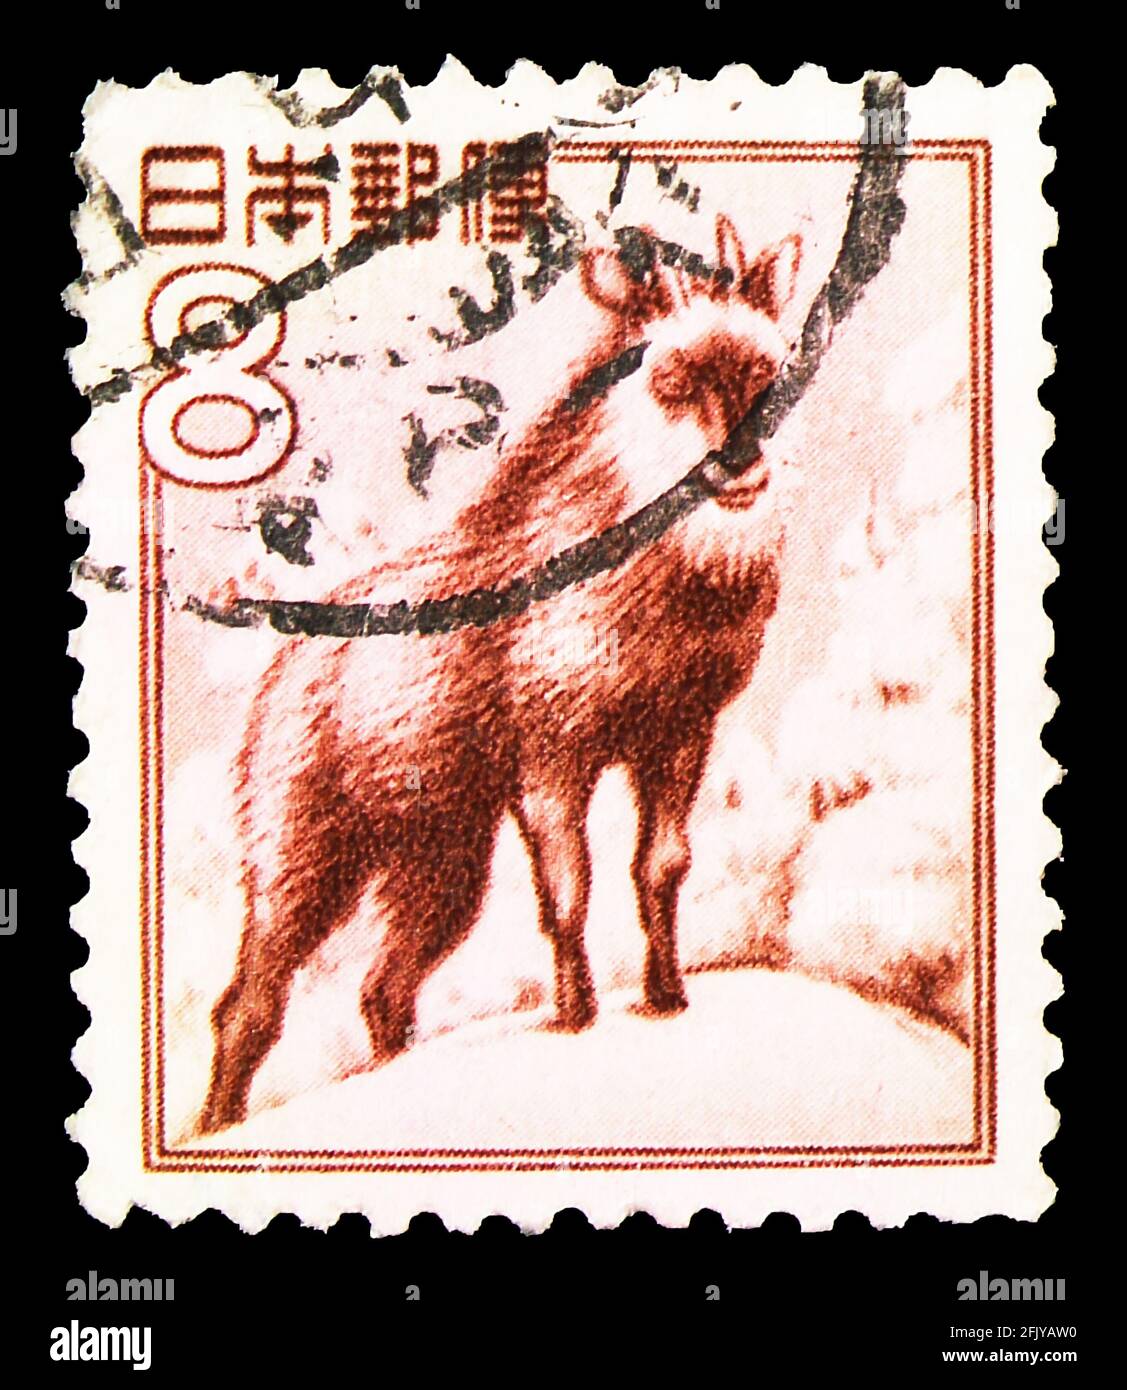 MOSCOW, RUSSIA - SEPTEMBER 27, 2019: Postage stamp printed in Japan shows Japanese Serow (Capricornis crispus), Fauna, Flora and National Treasures (1 Stock Photo